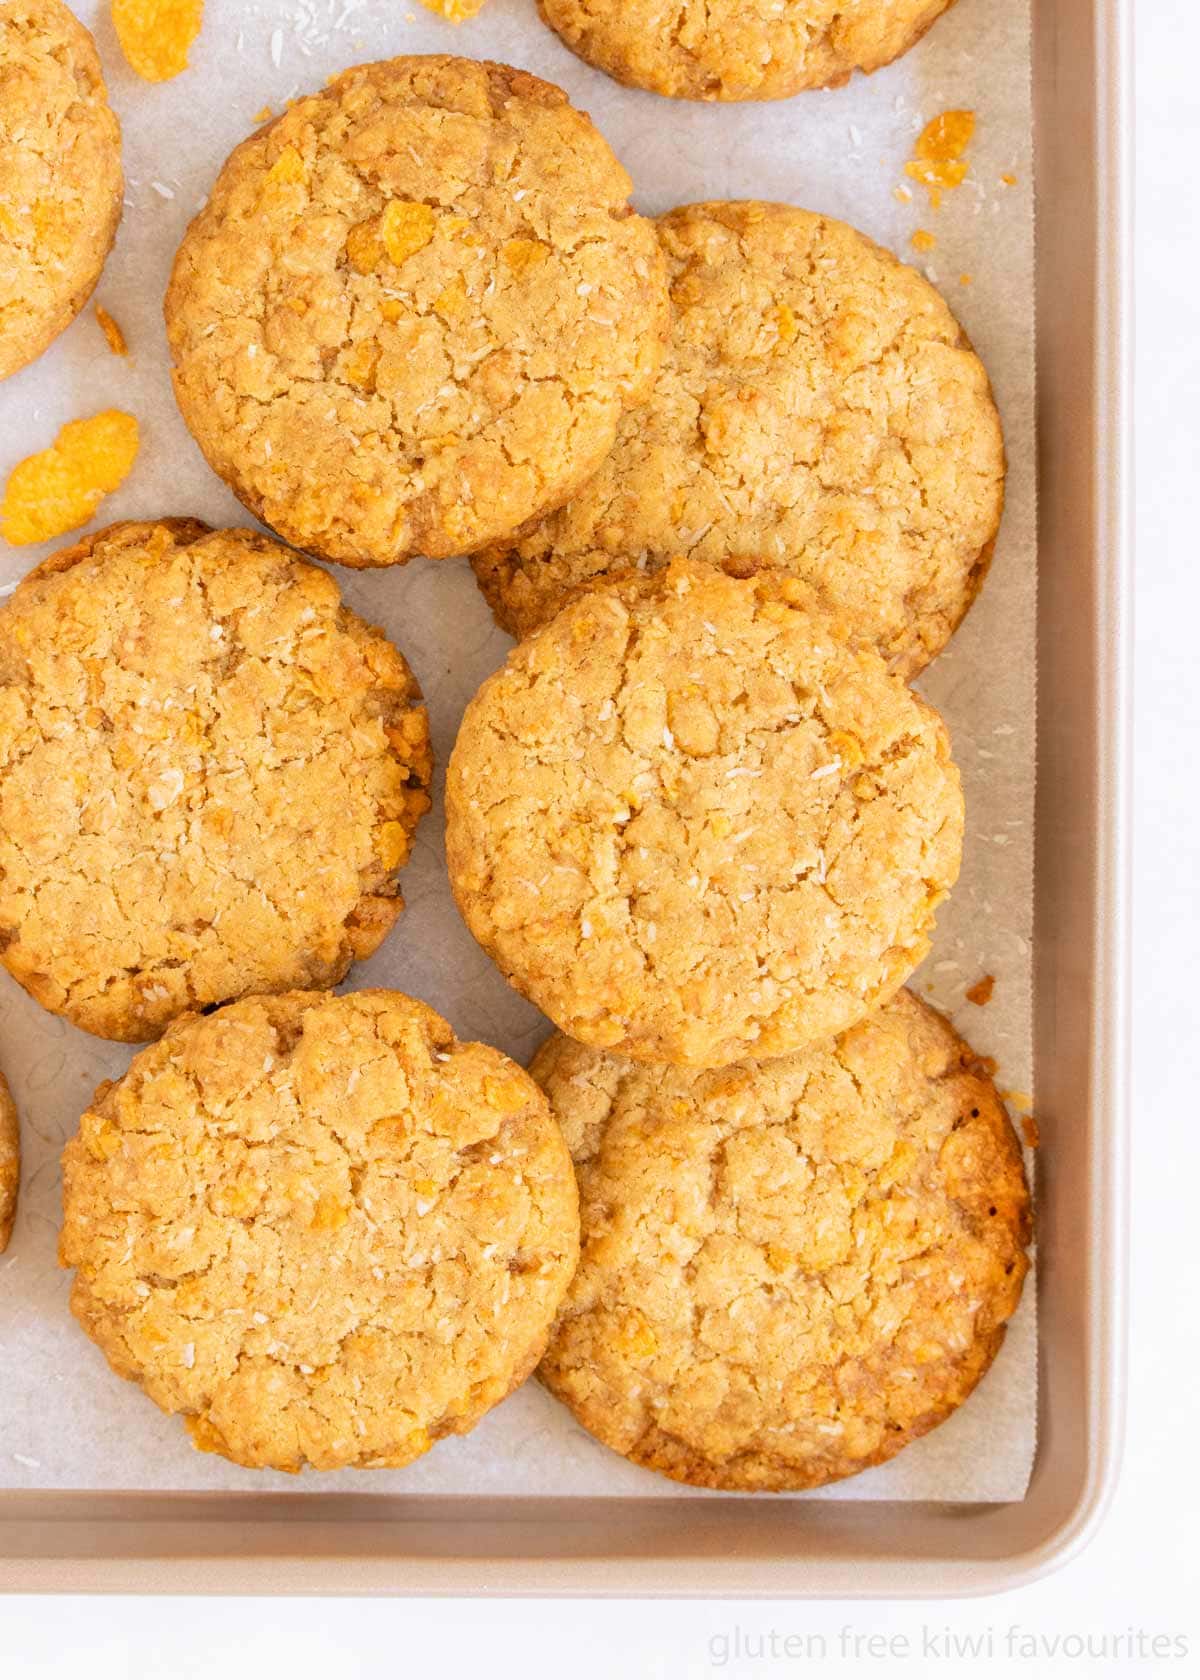 Anzac biscuits stacked in a baking tray.